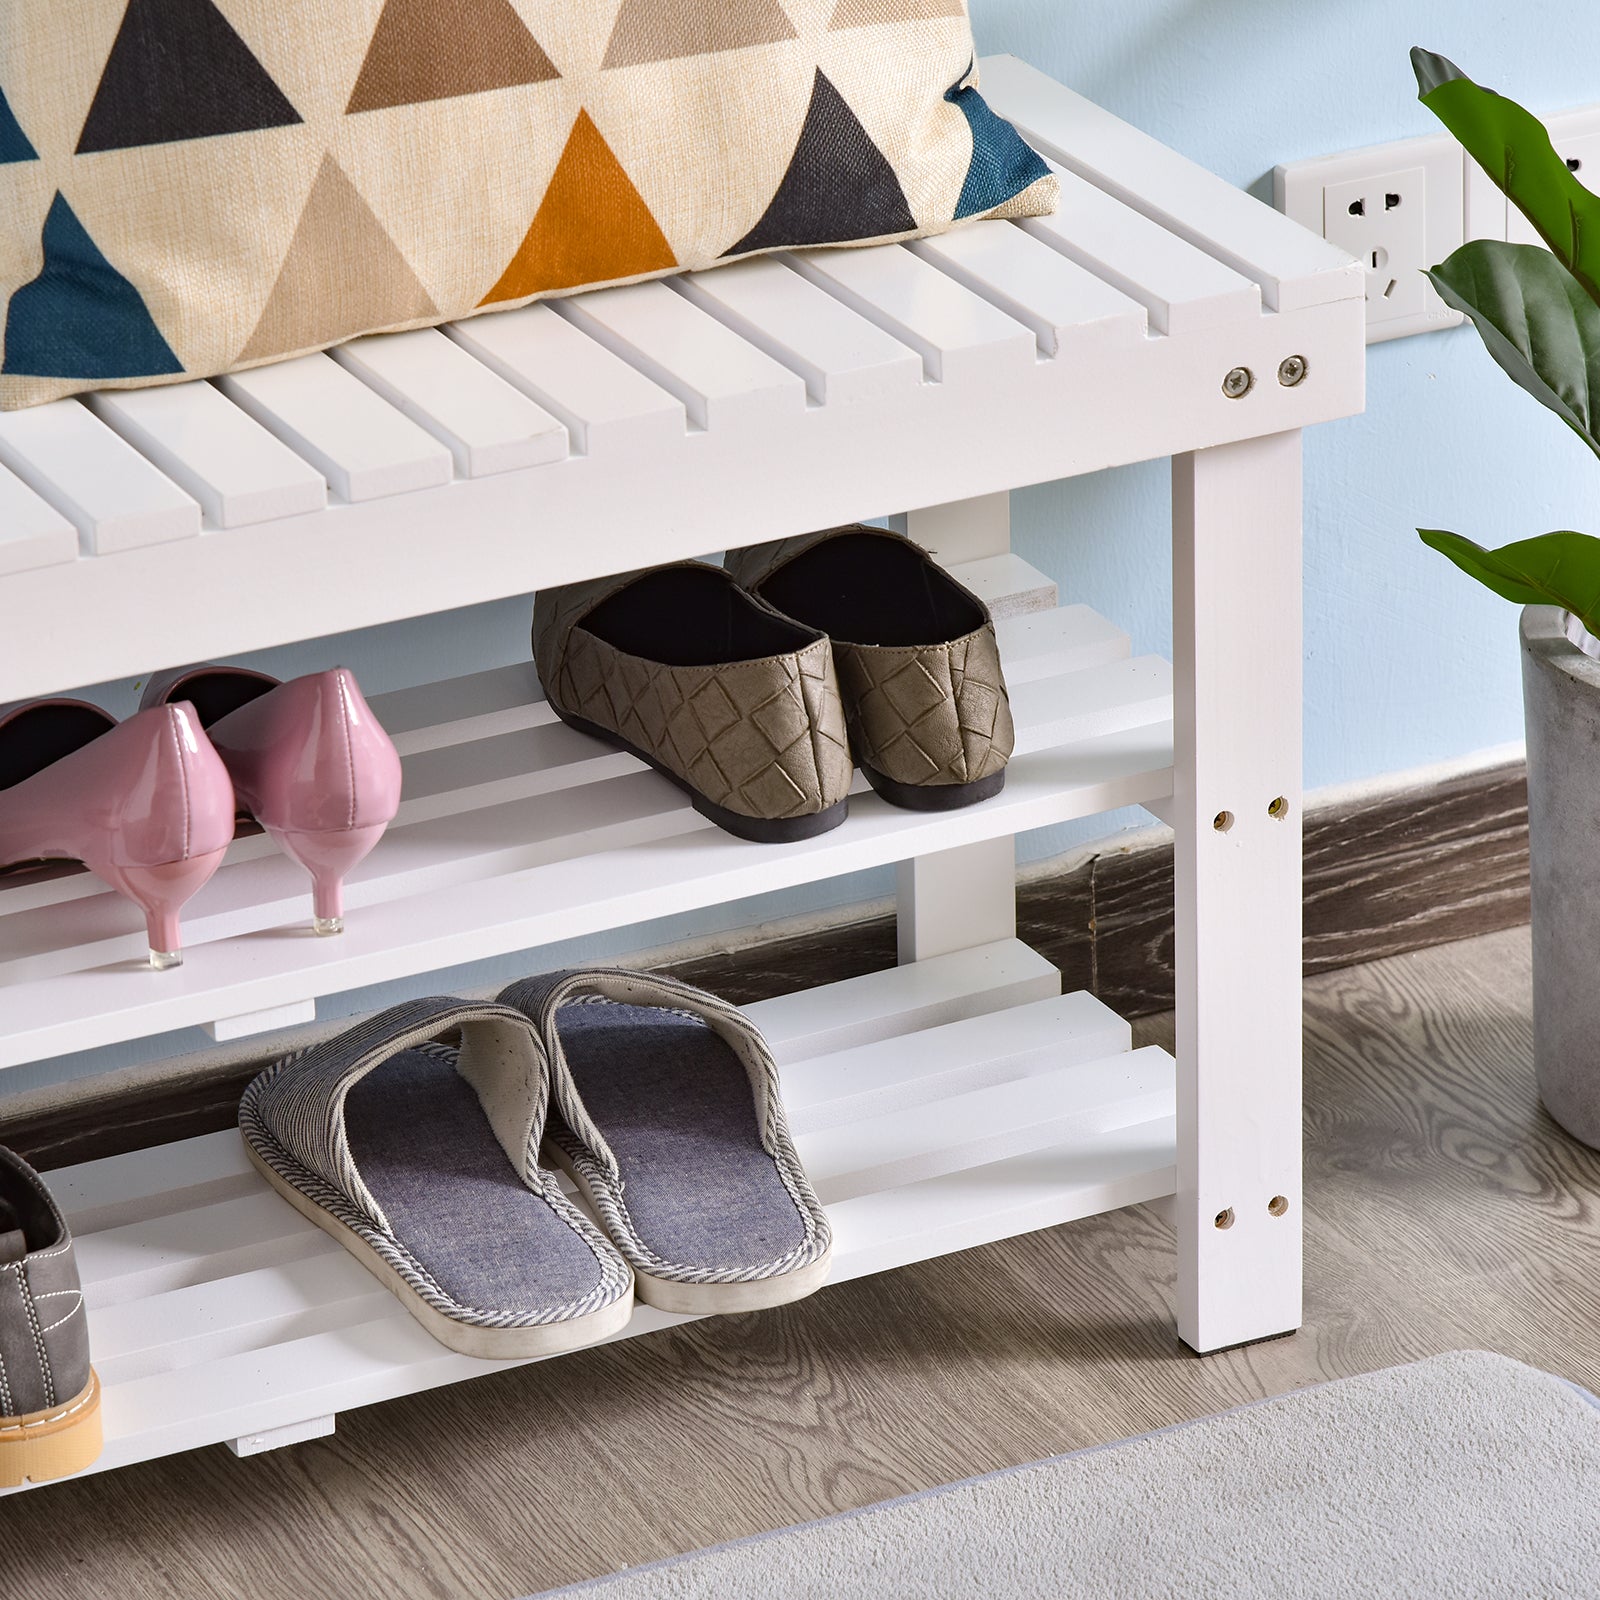 HOMCOM Shoe Bench, 3-Tier Wooden Shoe Rack with Hidden Storage Compartment, Slatted Shelves, Home Storage Unit, Hallway Furniture, White - Inspirely